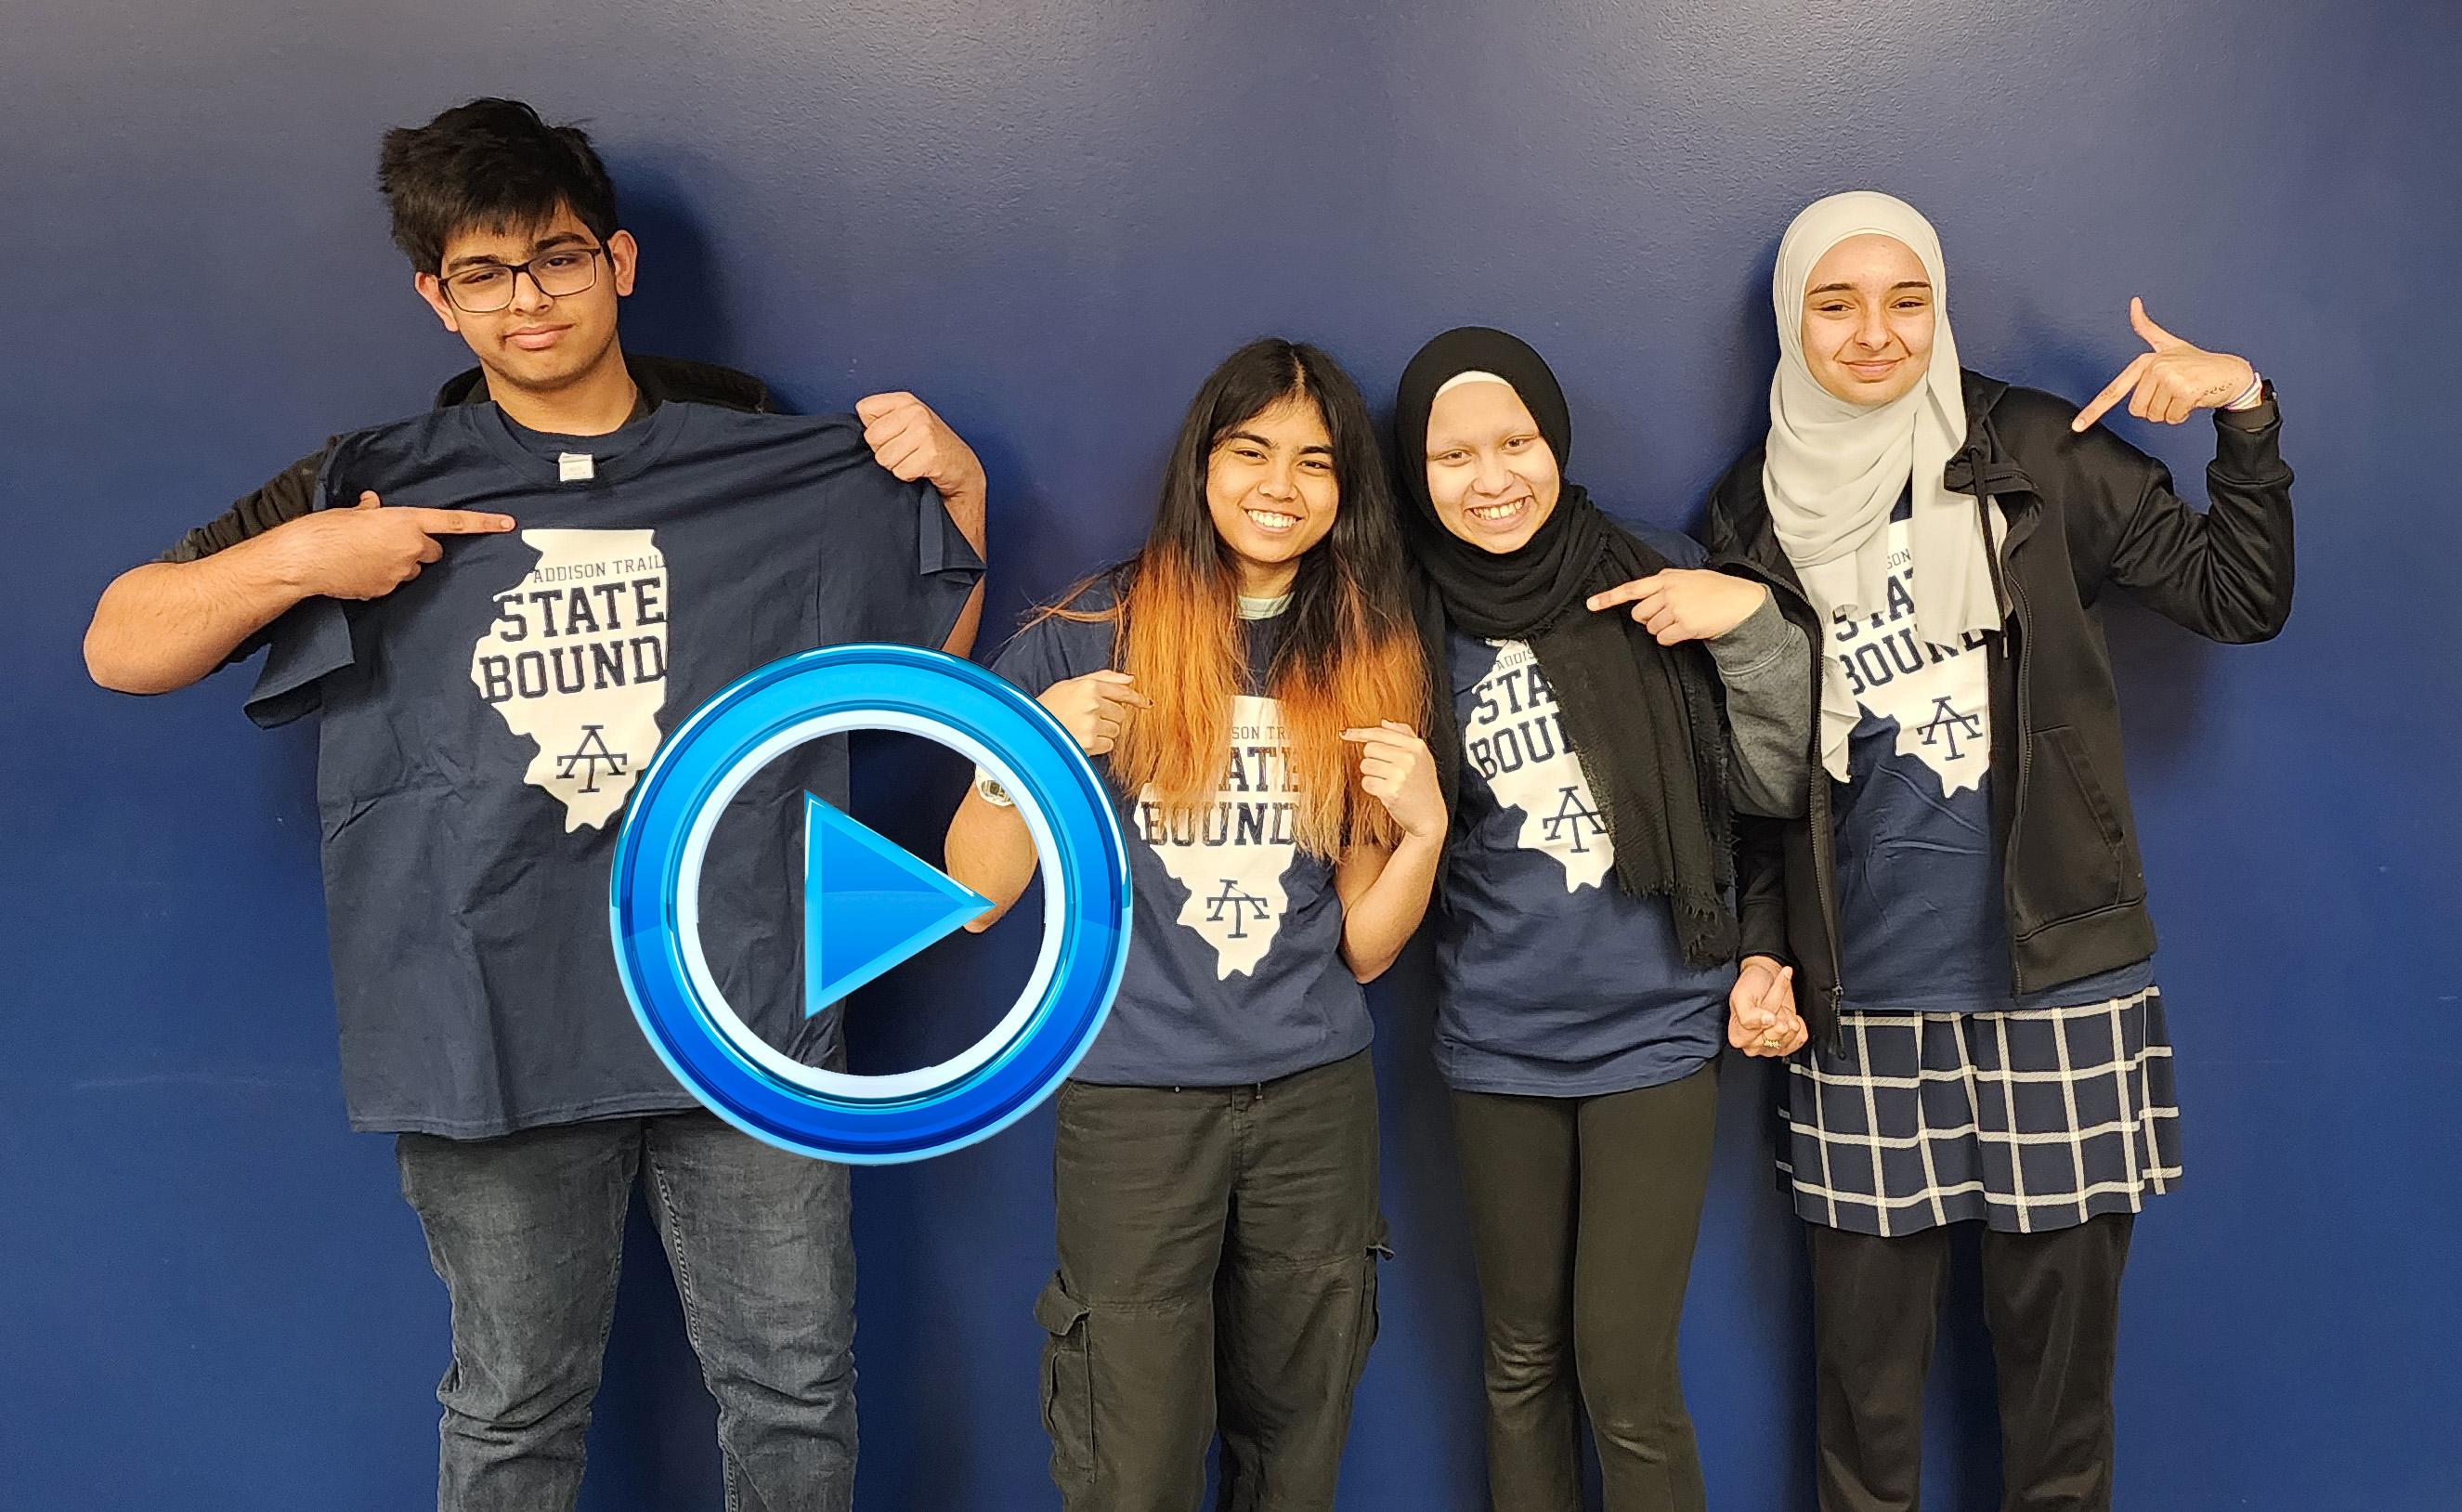 Addison Trail hosts State send-off celebration for members of Science Olympiad Team